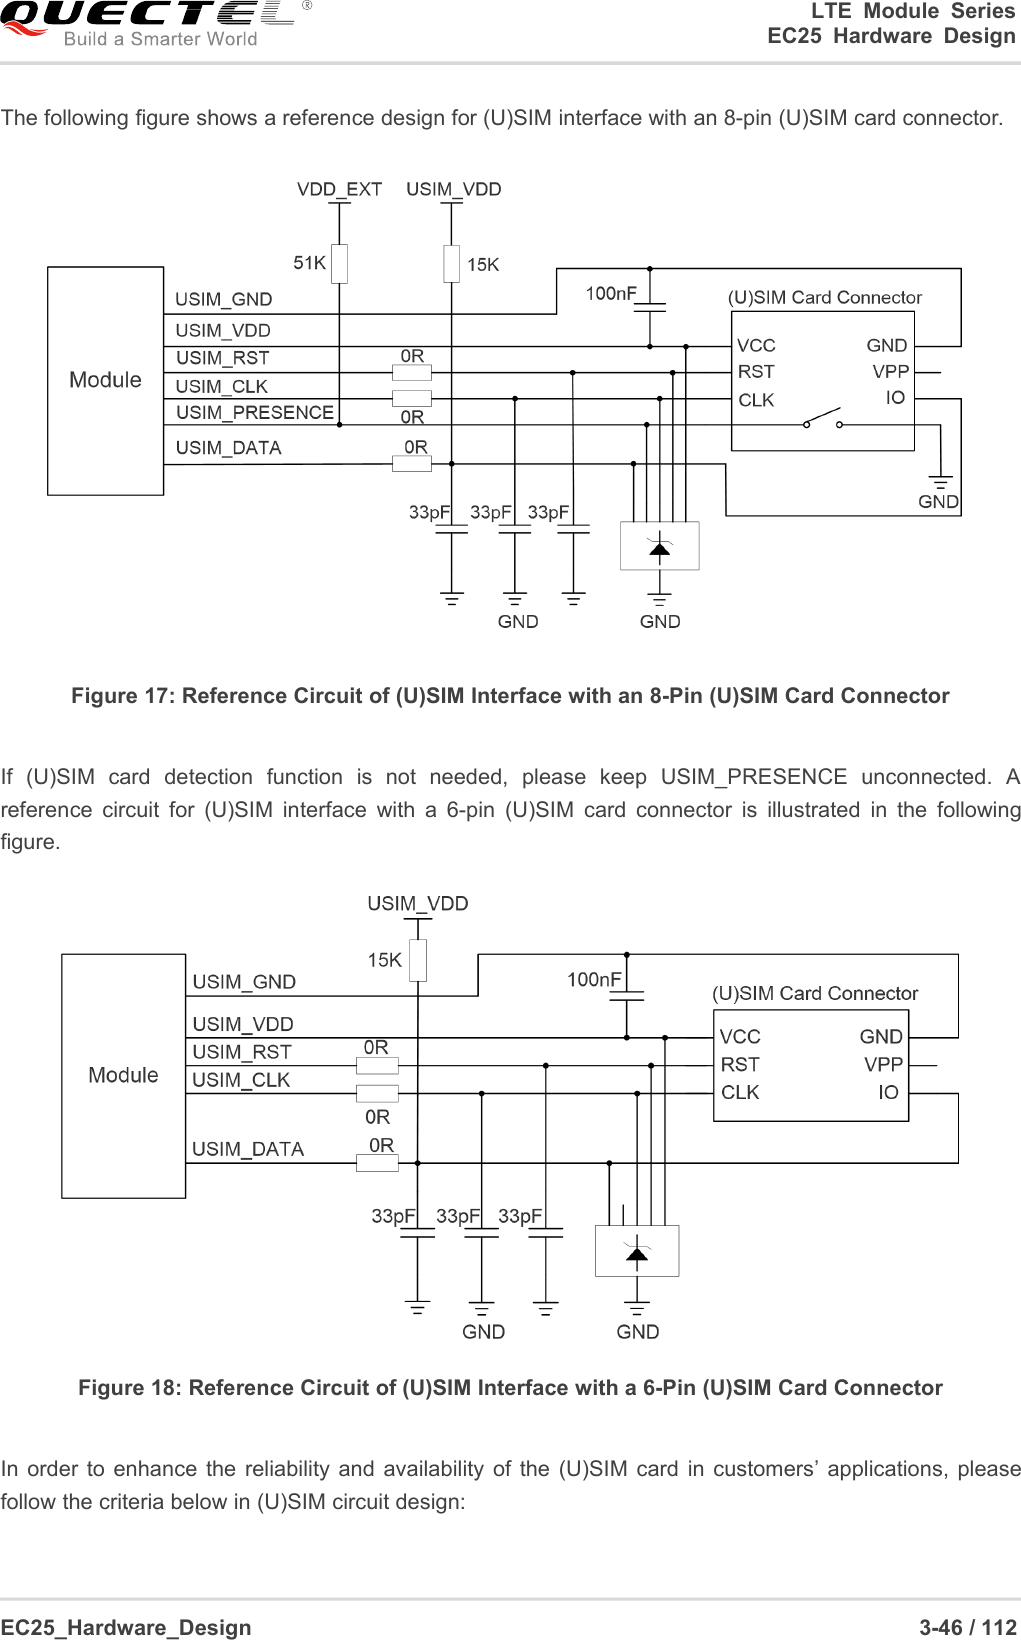 LTE Module SeriesEC25 Hardware DesignEC25_Hardware_Design 3-46 / 112The following figure shows a reference design for (U)SIM interface with an 8-pin (U)SIM card connector.Figure 17: Reference Circuit of (U)SIM Interface with an 8-Pin (U)SIM Card ConnectorIf (U)SIM card detection function is not needed, please keep USIM_PRESENCE unconnected. Areference circuit for (U)SIM interface with a 6-pin (U)SIM card connector is illustrated in the followingfigure.Figure 18: Reference Circuit of (U)SIM Interface with a 6-Pin (U)SIM Card ConnectorIn order to enhance the reliability and availability of the (U)SIM card in customers’ applications, pleasefollow the criteria below in (U)SIM circuit design: